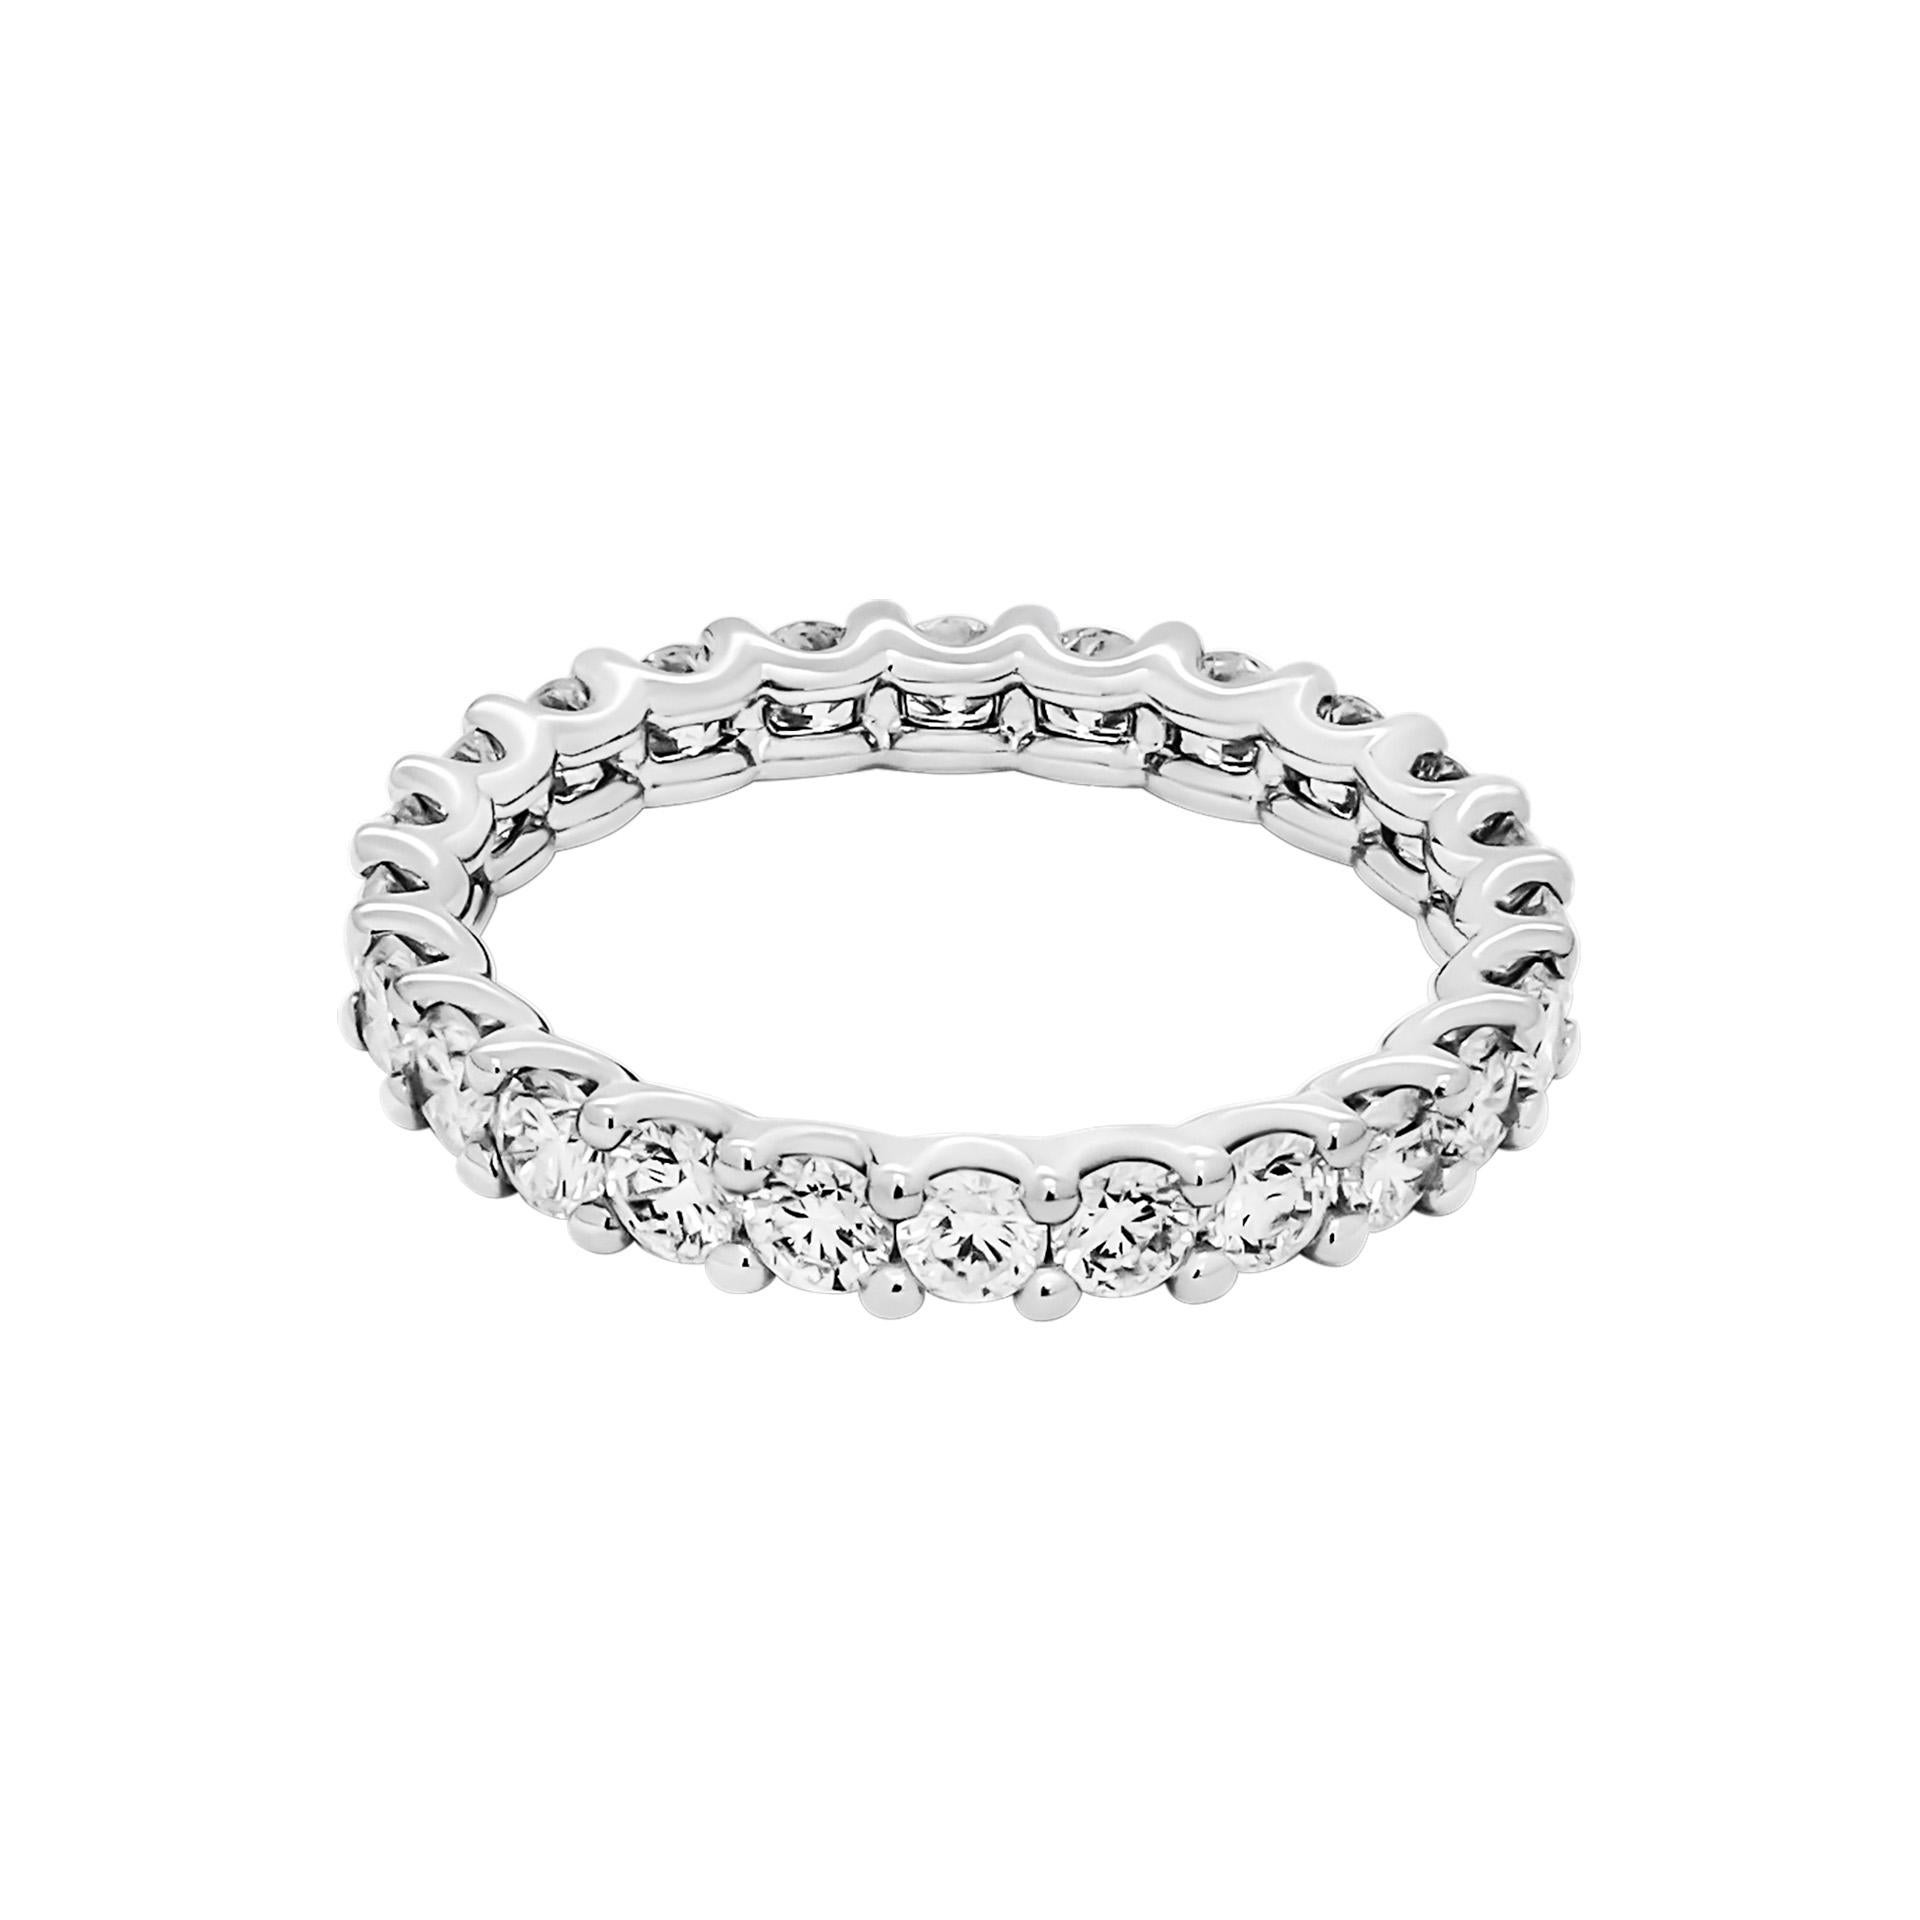 Wedding band in PT950
Total Carat Weight 1.50ct F/G color & VS Clarity
Eternity band style
 Size:6 (not sizable)